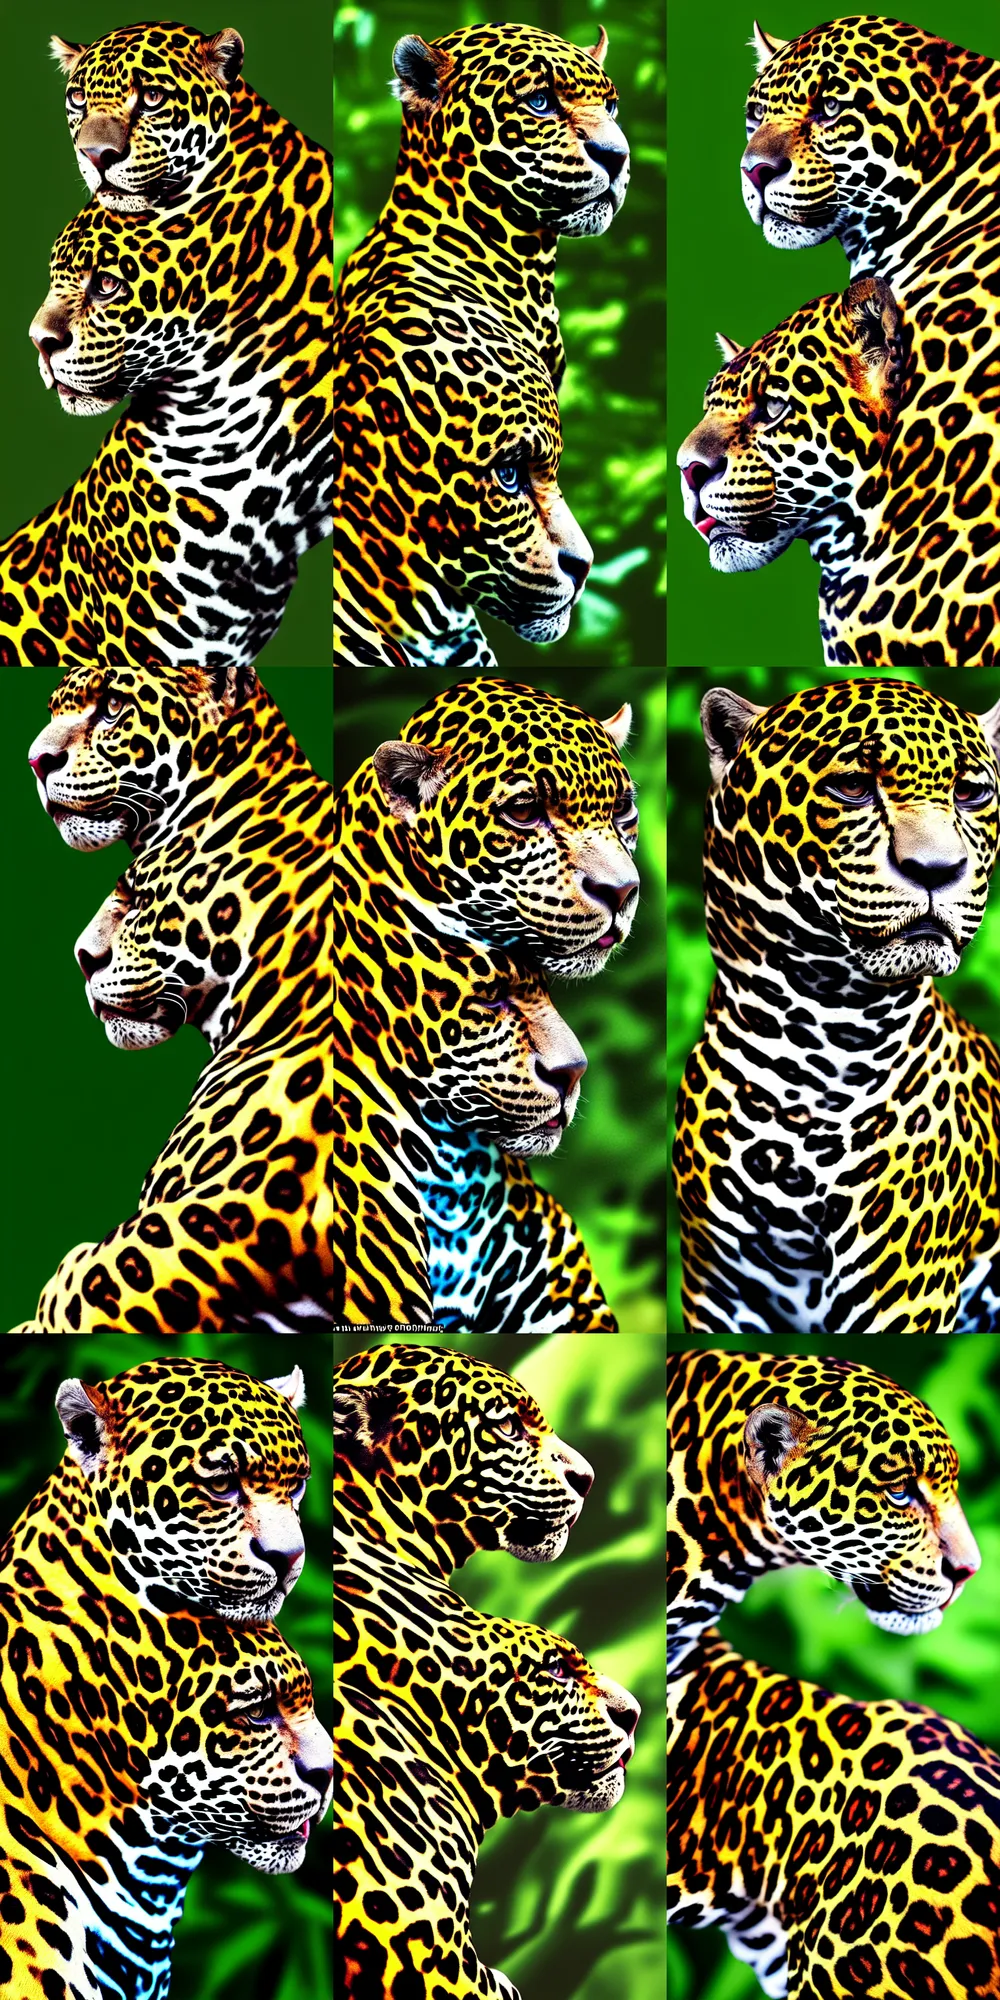 Prompt: A jaguar anthropomorph, the CEO of the Pan-Amazonian Corporate Reserve (est. 2047), ponders his next move